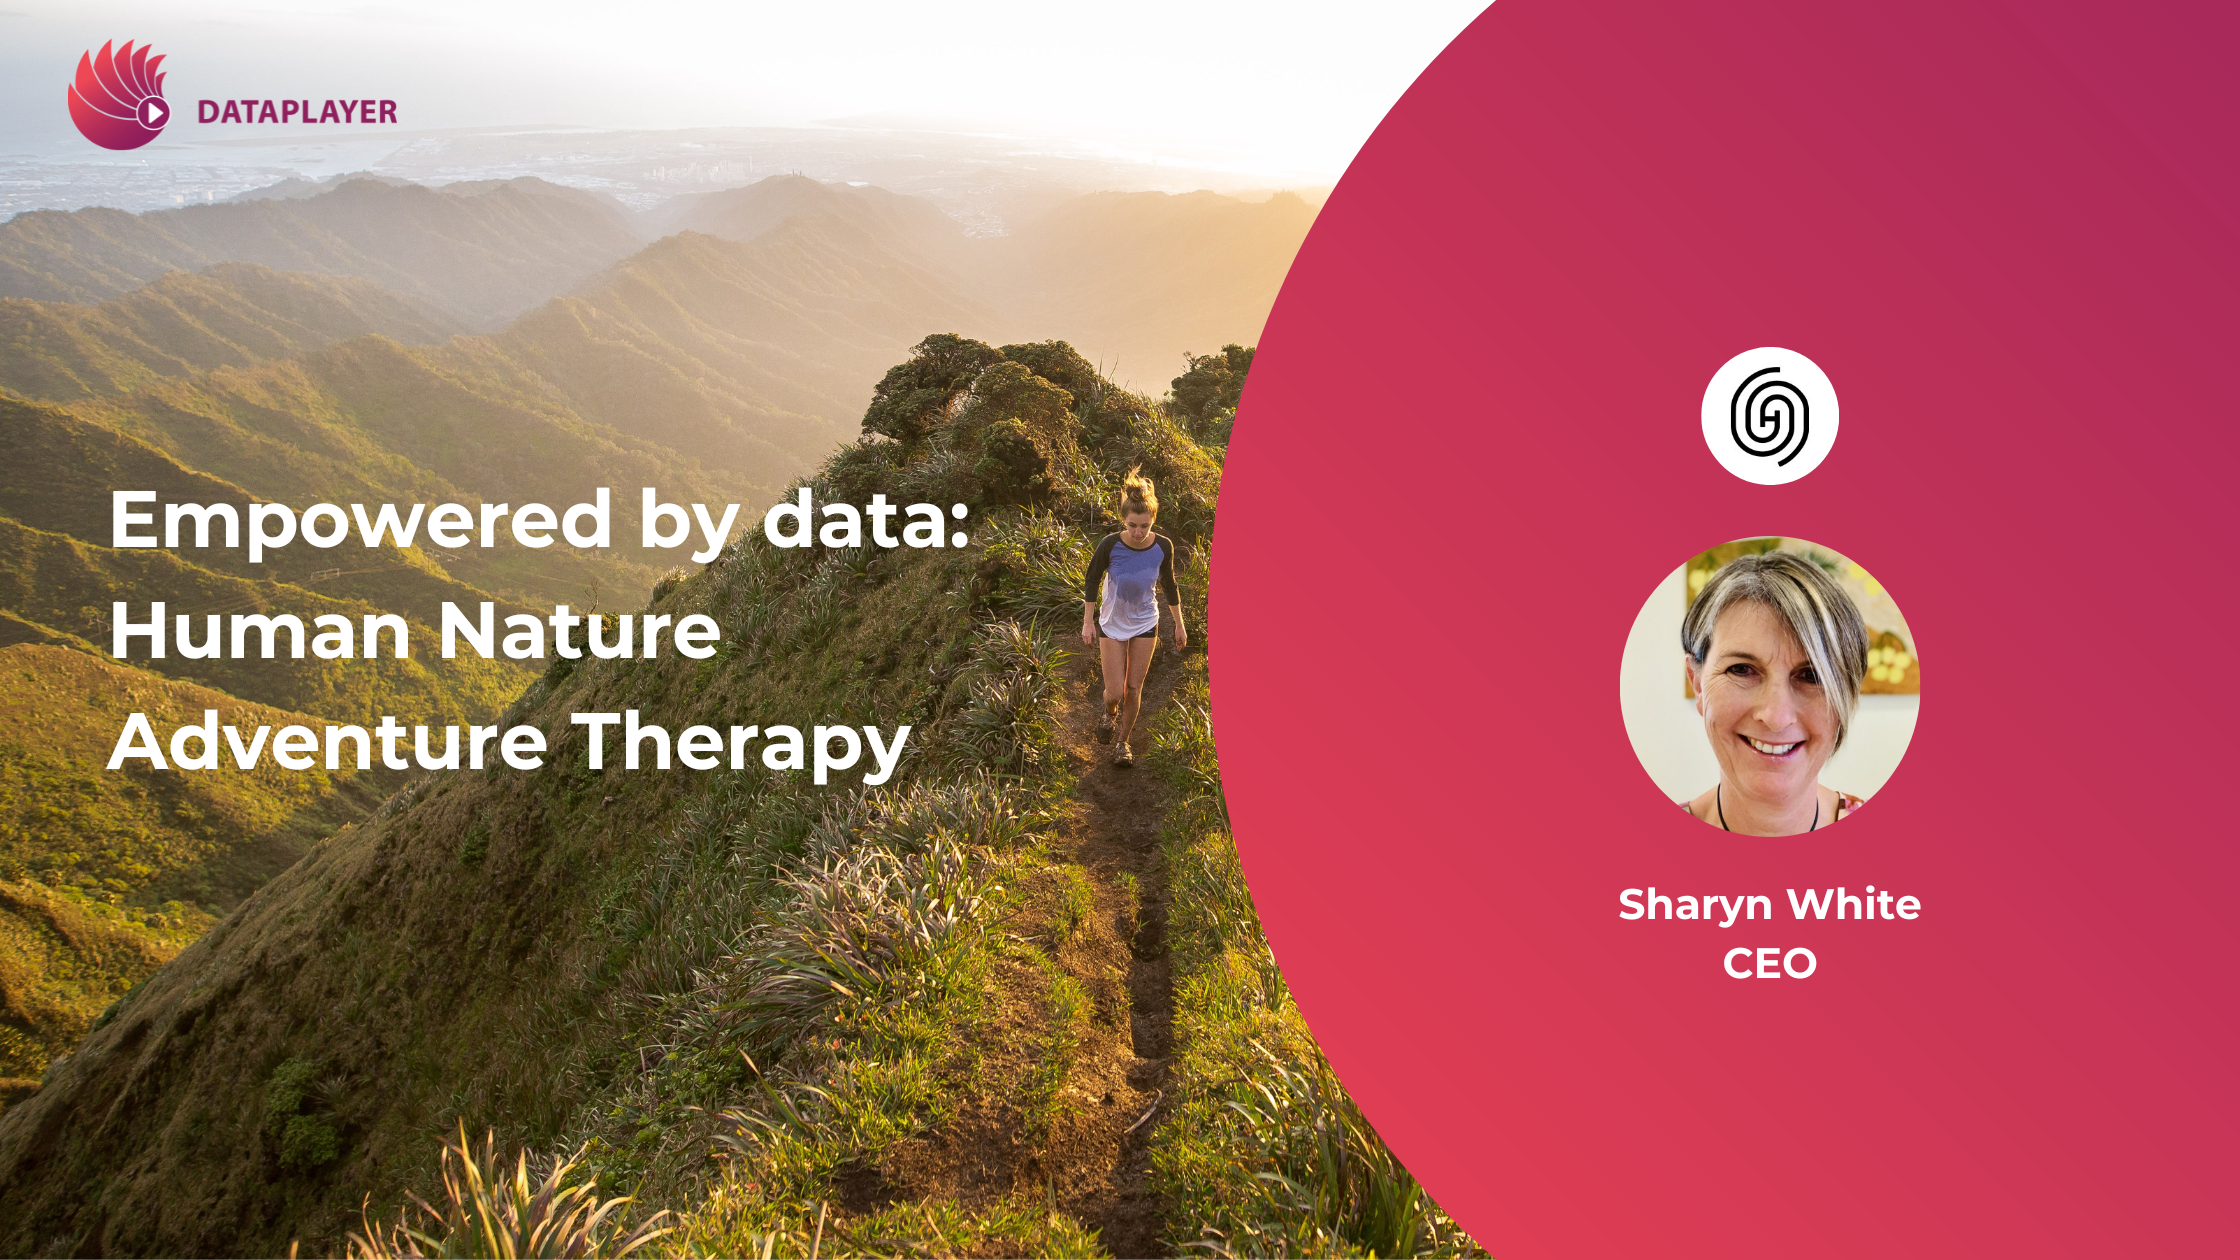 Empowered by data: Human Nature Adventure Therapy